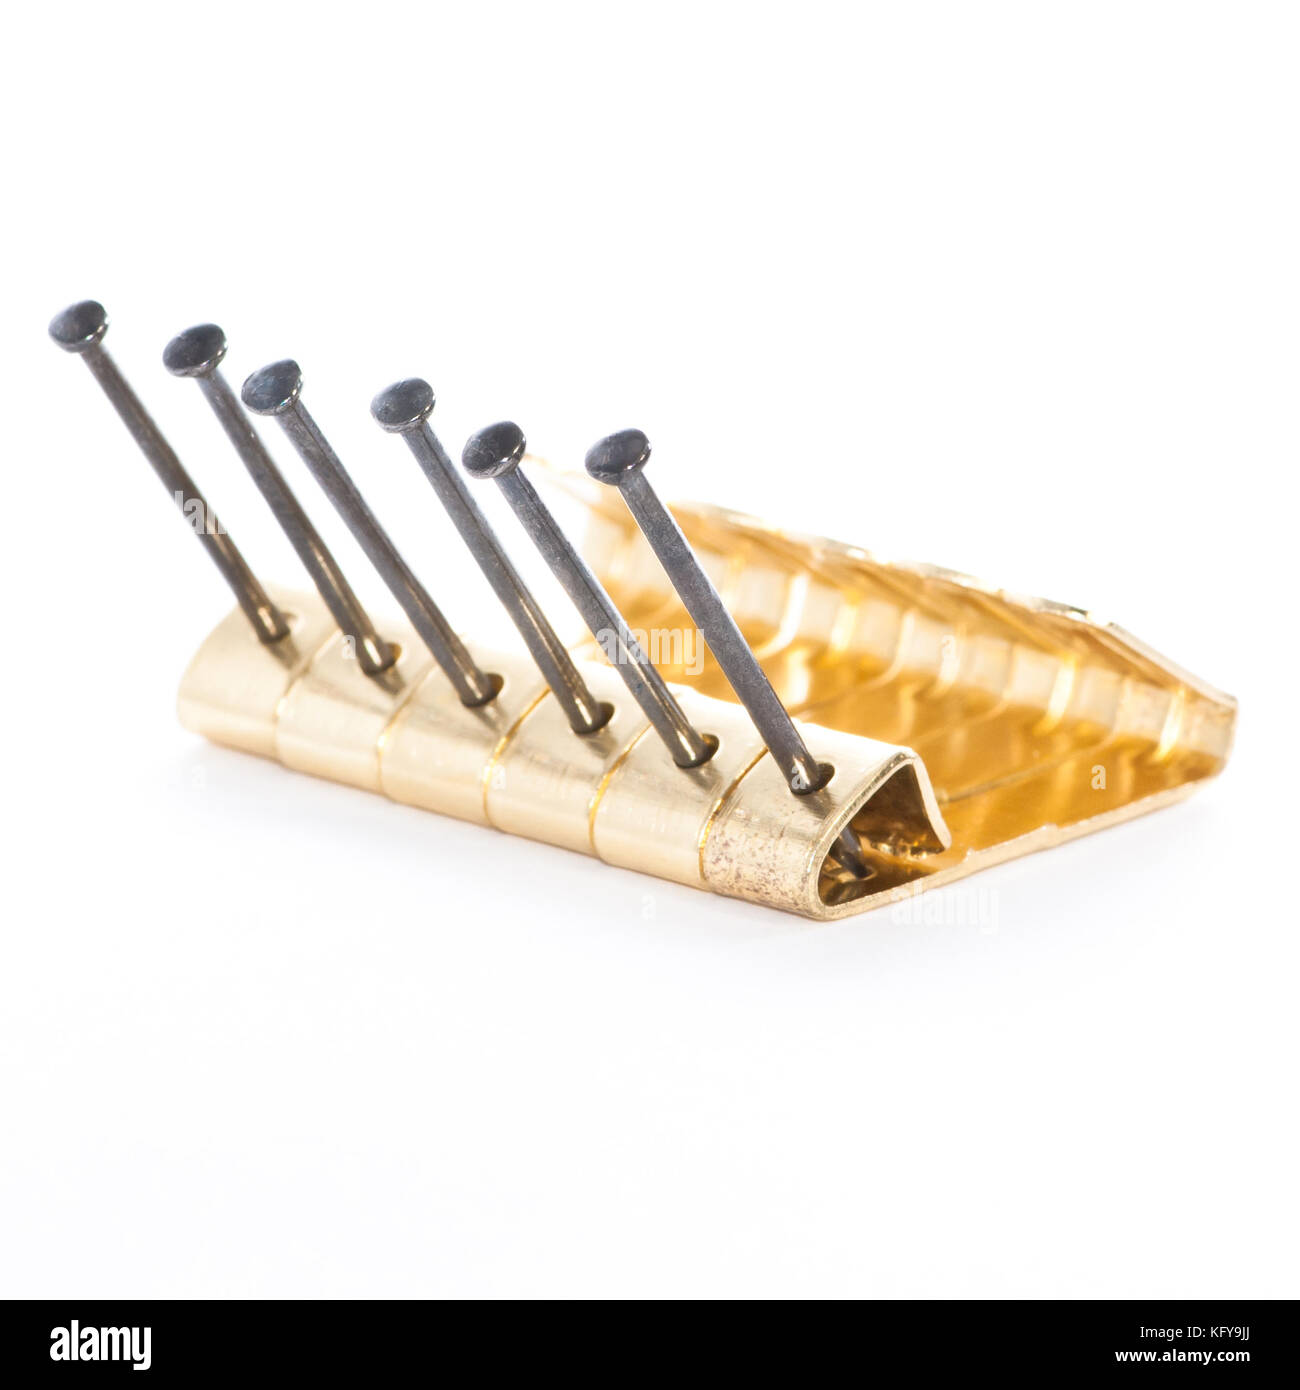 A row of brass picture hooks and nails shot against a white background. Stock Photo